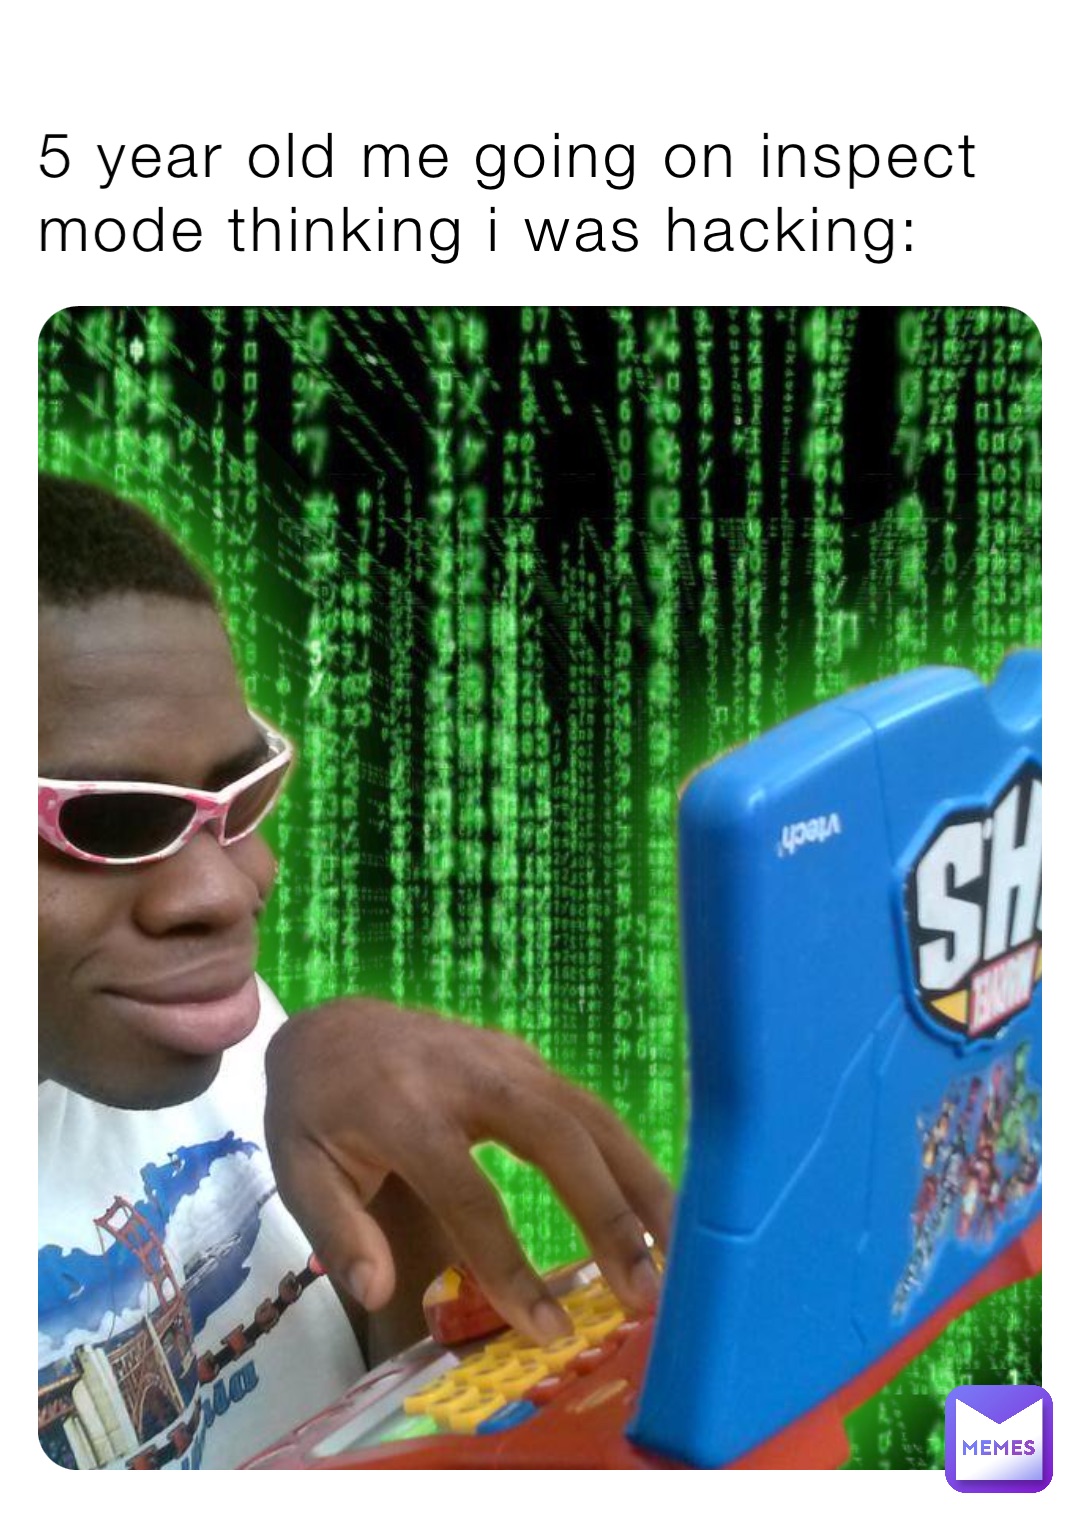 5 year old me going on inspect mode thinking i was hacking: